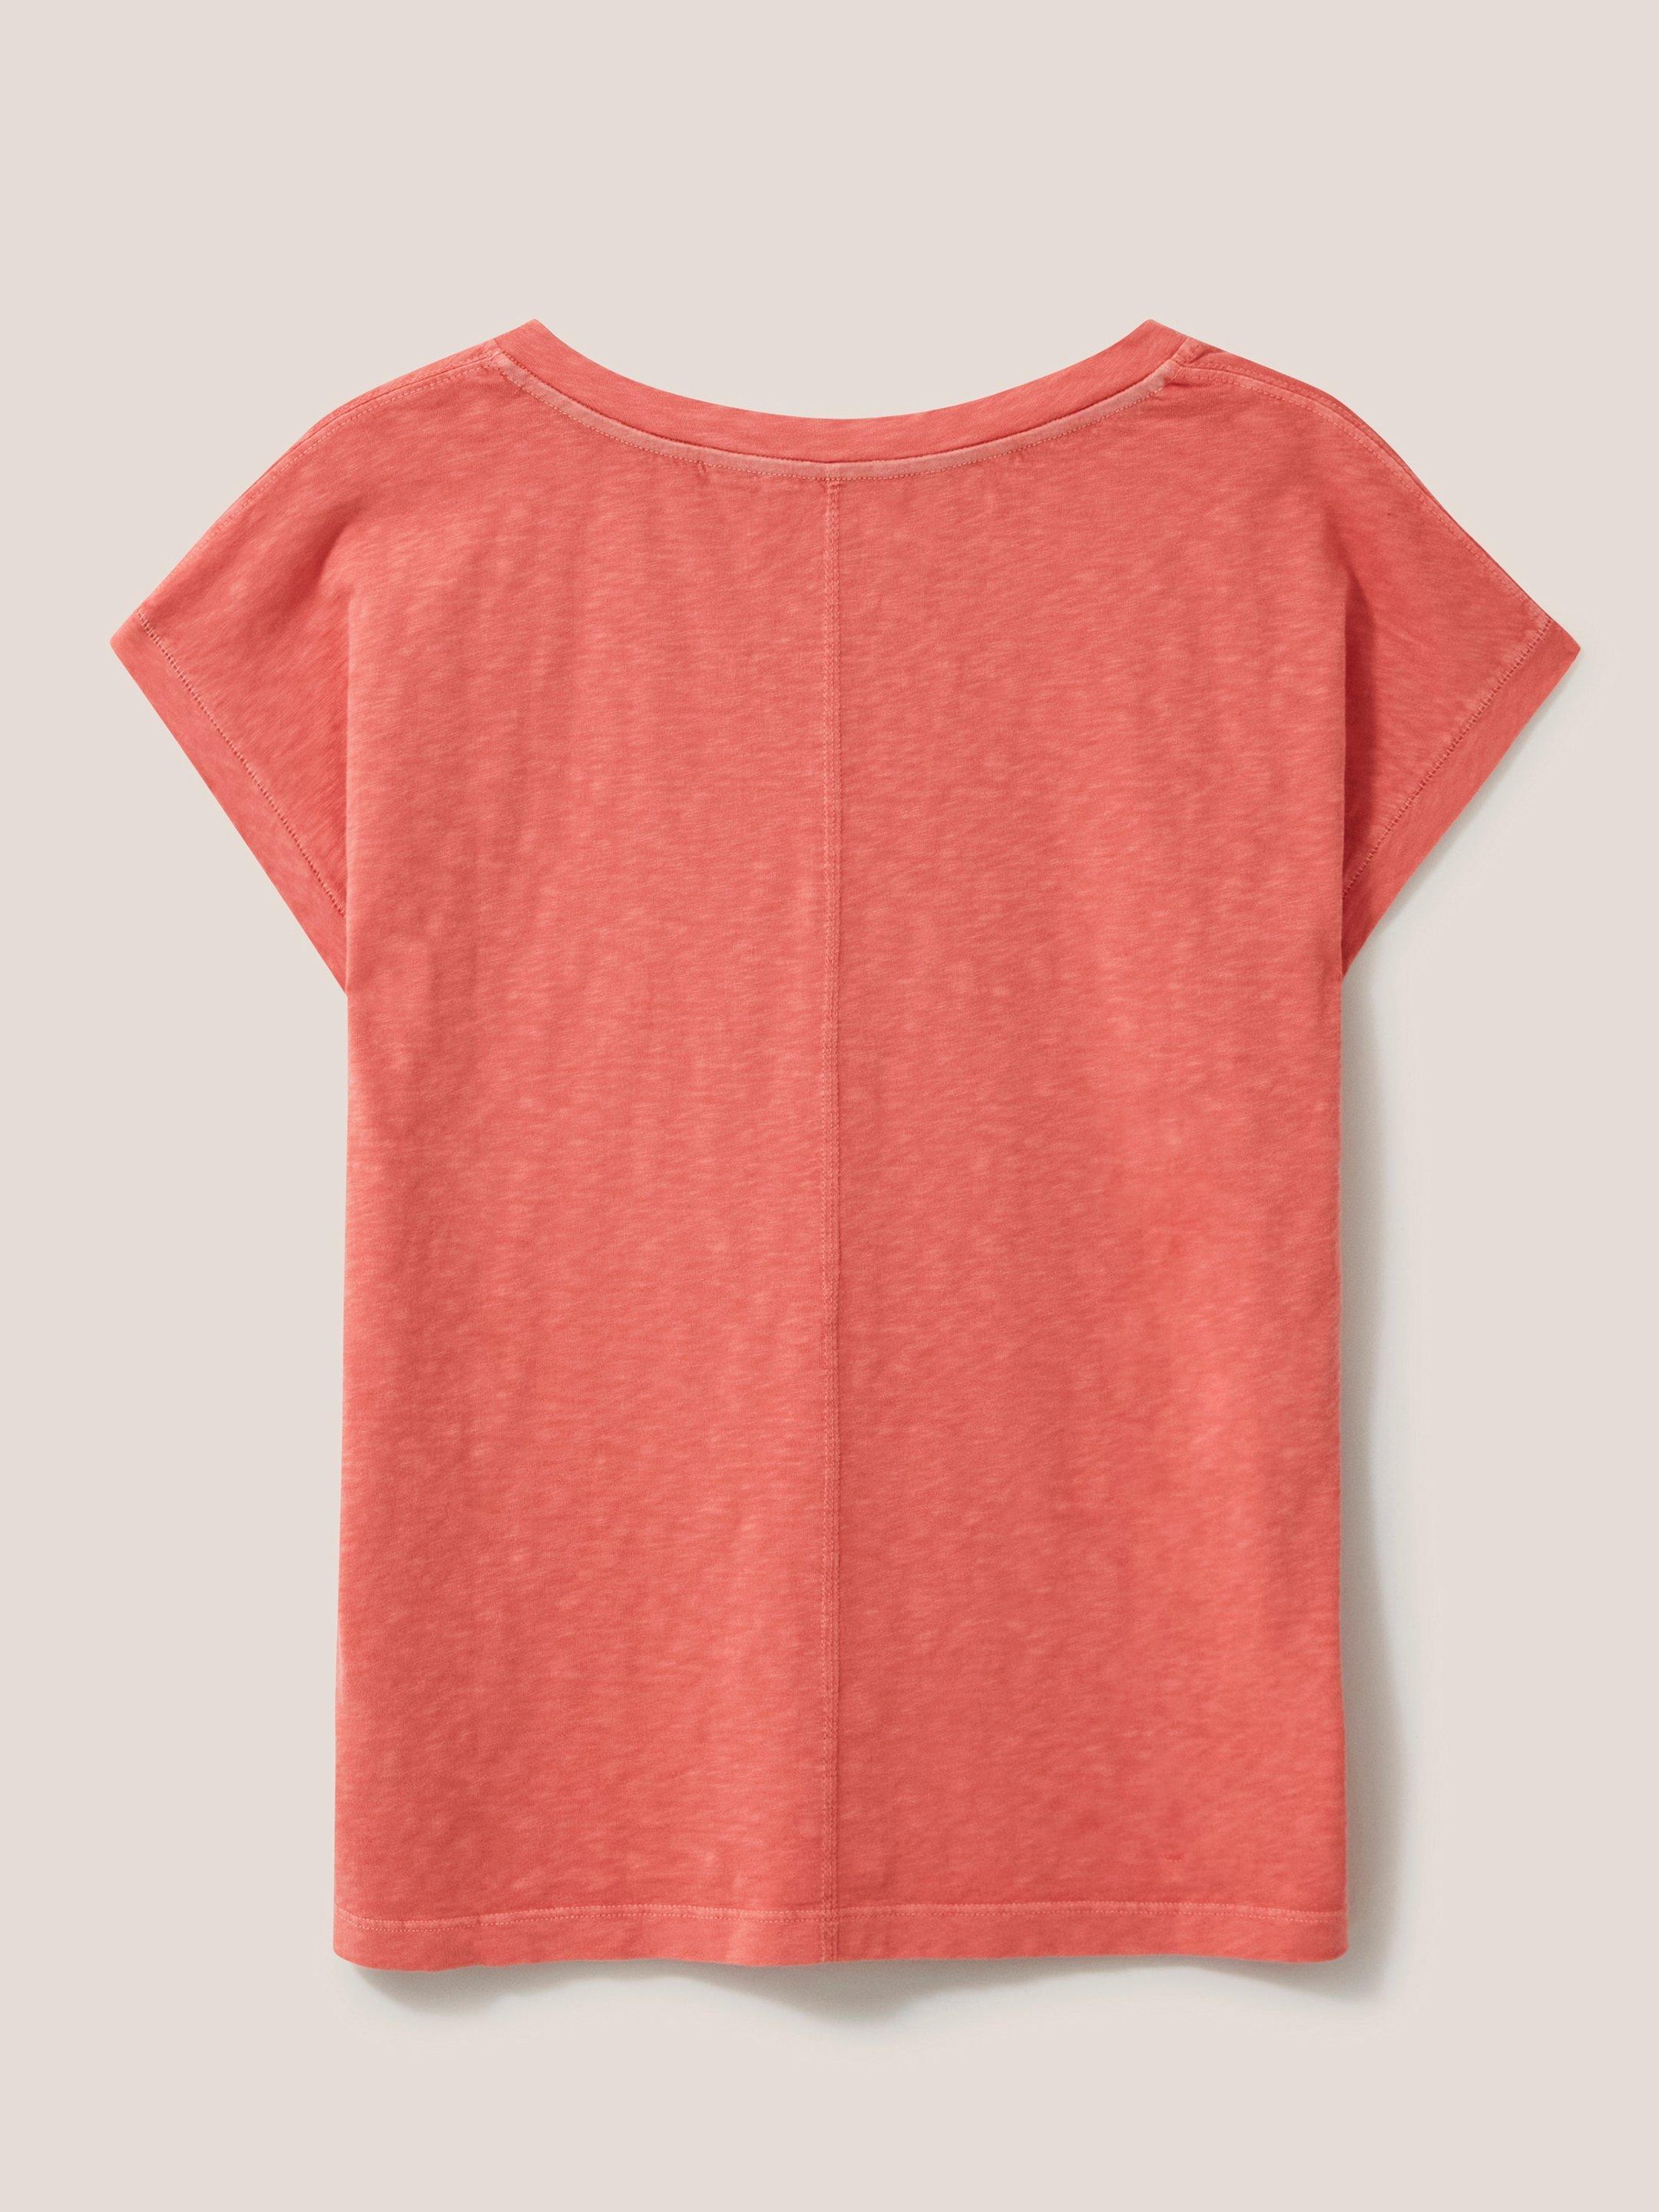 Nelly Notch Neck Tee in MID PINK - FLAT BACK